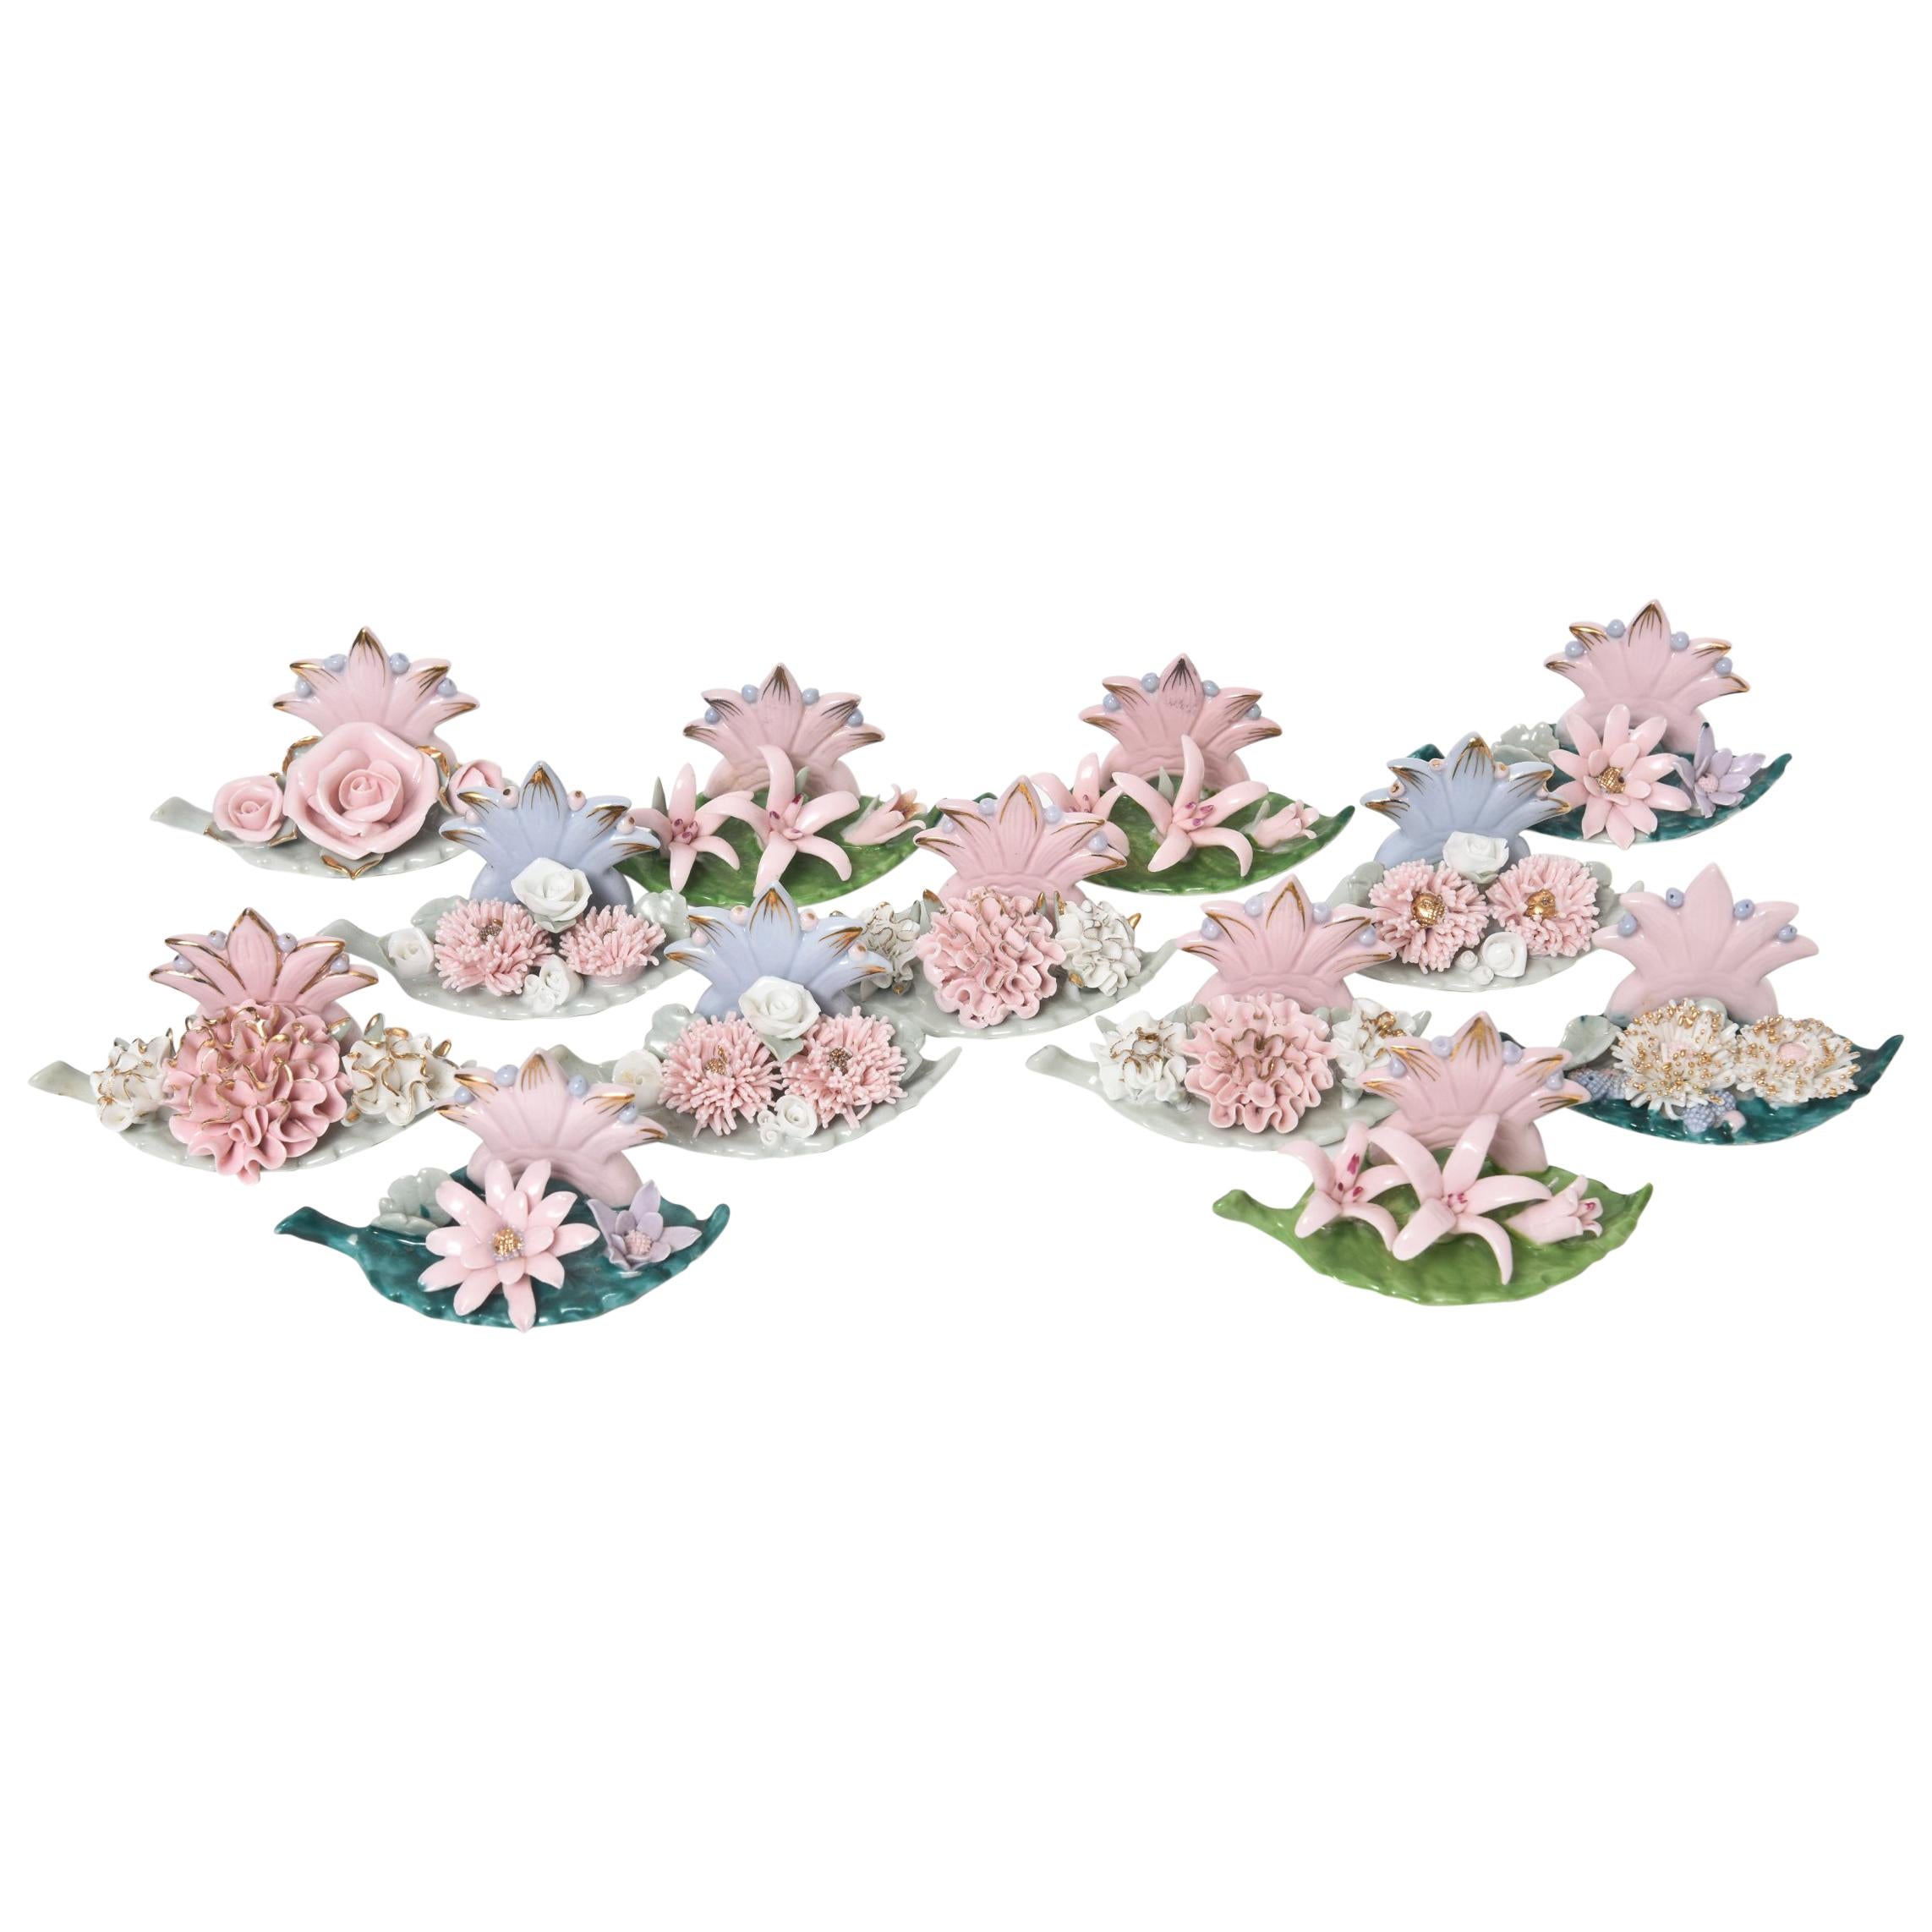 Lamore Occupied Japan Star and Flower Placecard / Place Card Holders Set of 13